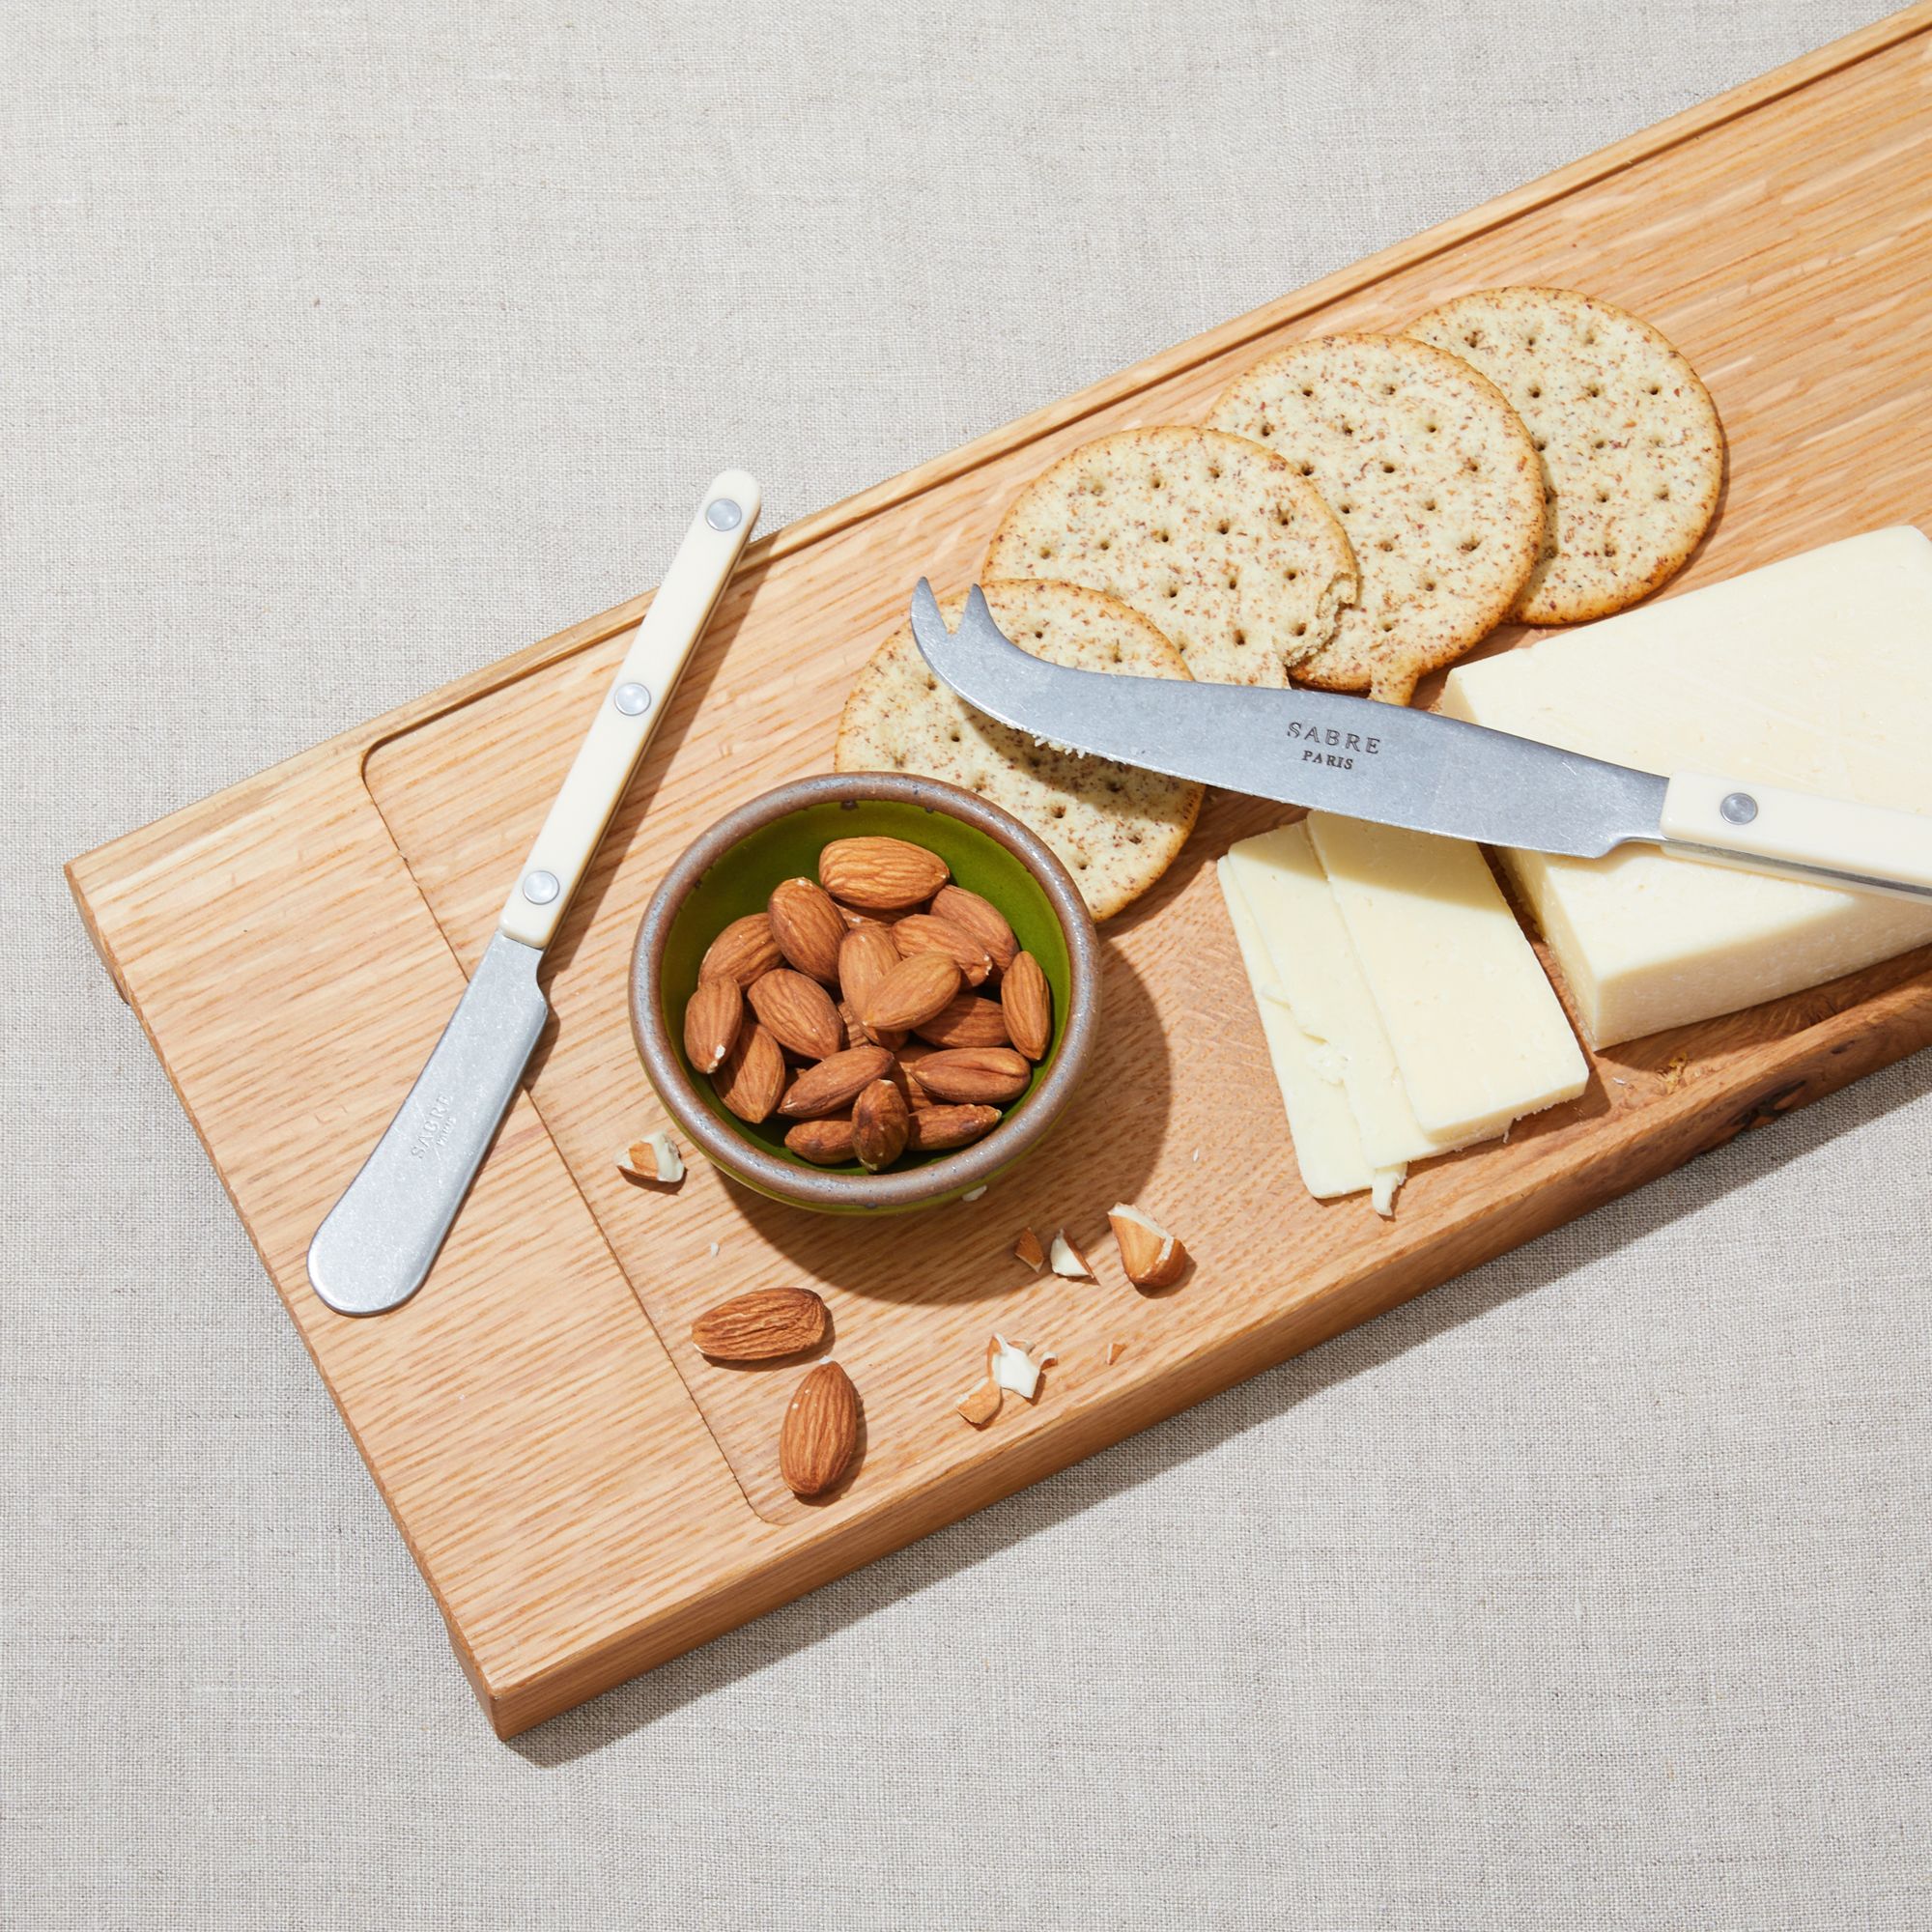 A narrow rectangle of light brown wood with a vertical groove at either end, a small bowl the size of your palm in a fabulous green glaze, two ivory-handled cheese knifes and spreaders, one for hard cheeses, one for soft.